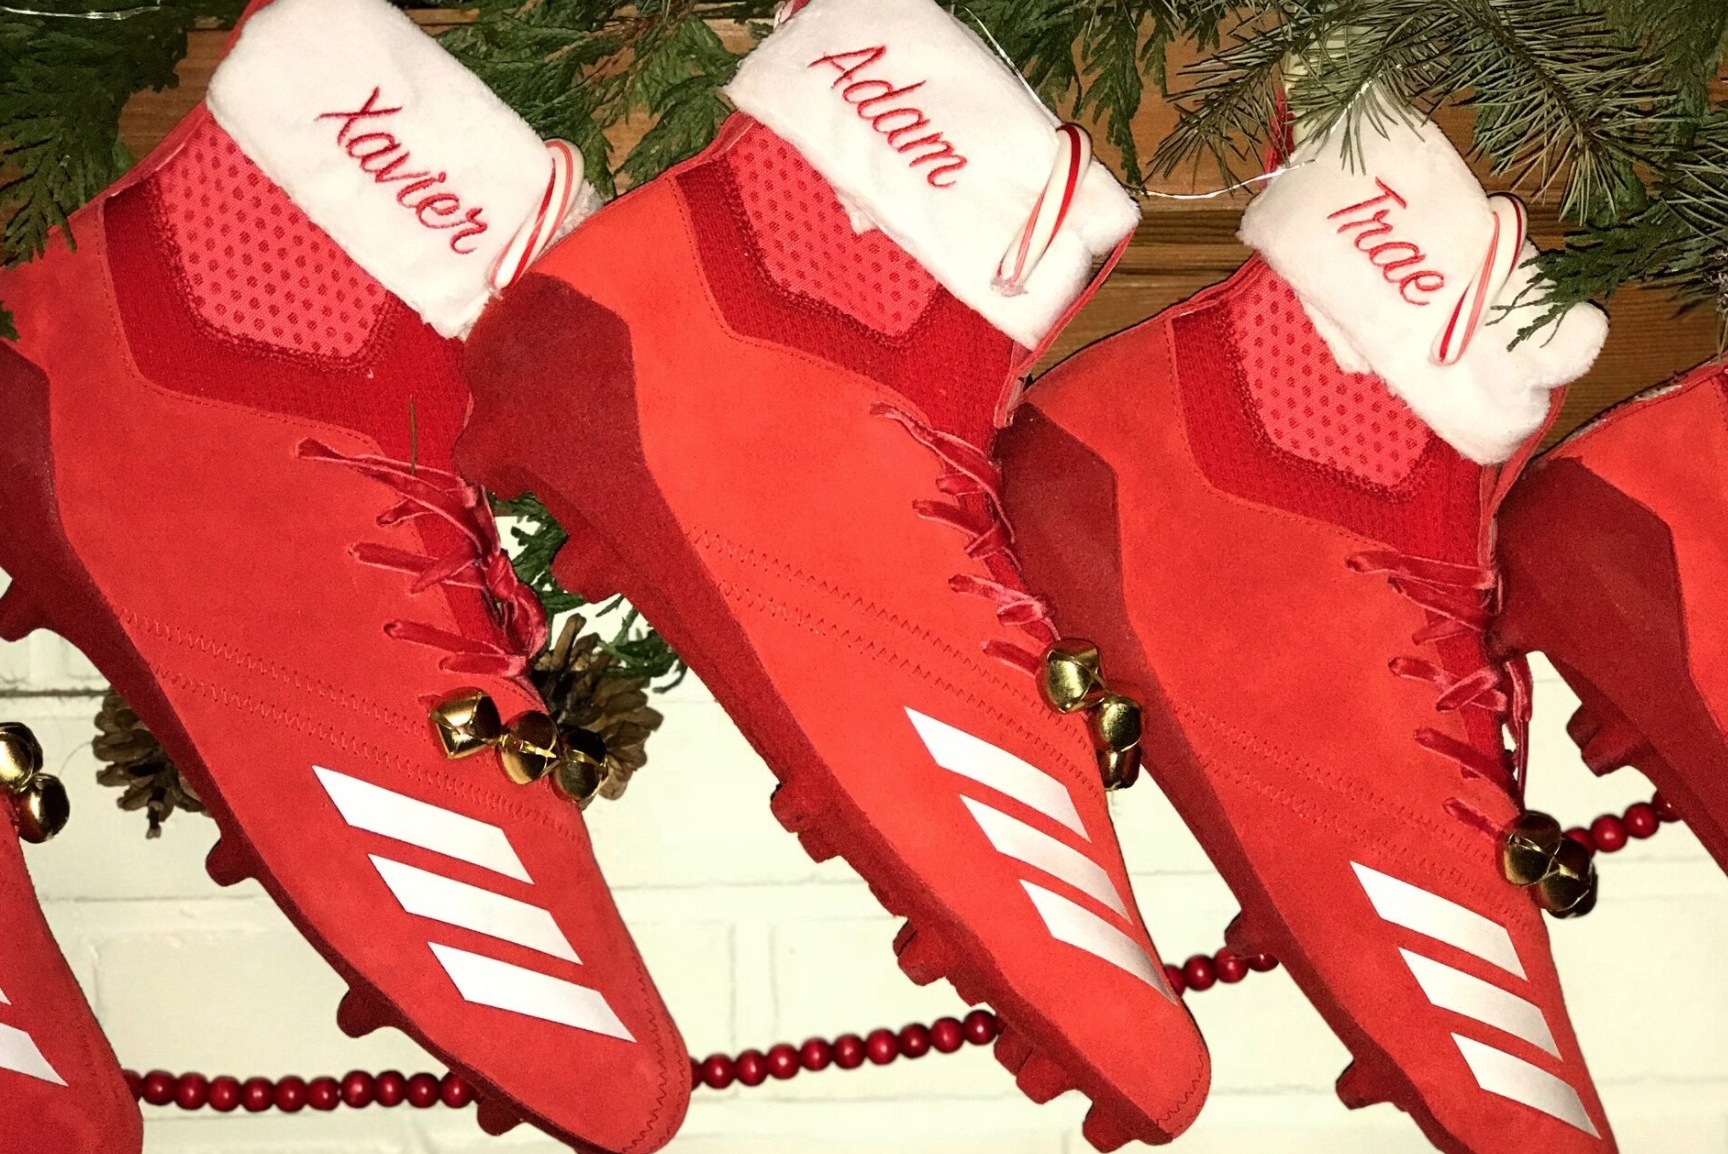 Adidas Creates Cleats Resembling Stockings for Players | News, Scores, Highlights, Stats, Rumors | Bleacher Report